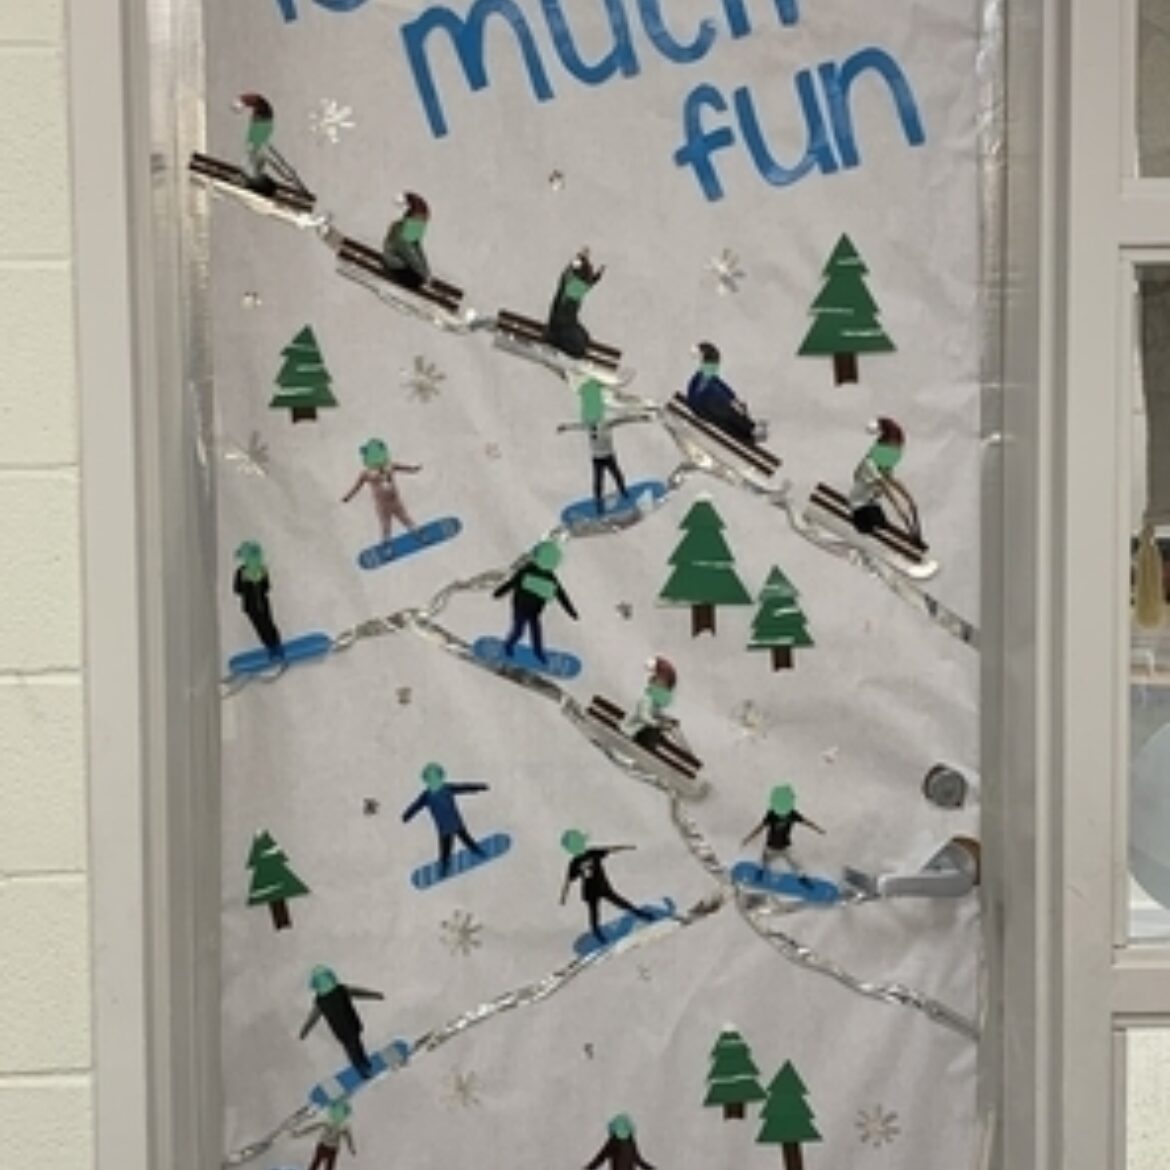 Door decorated with pine trees, cut out people on sleds and snow that says "2nd grade is so much fun"